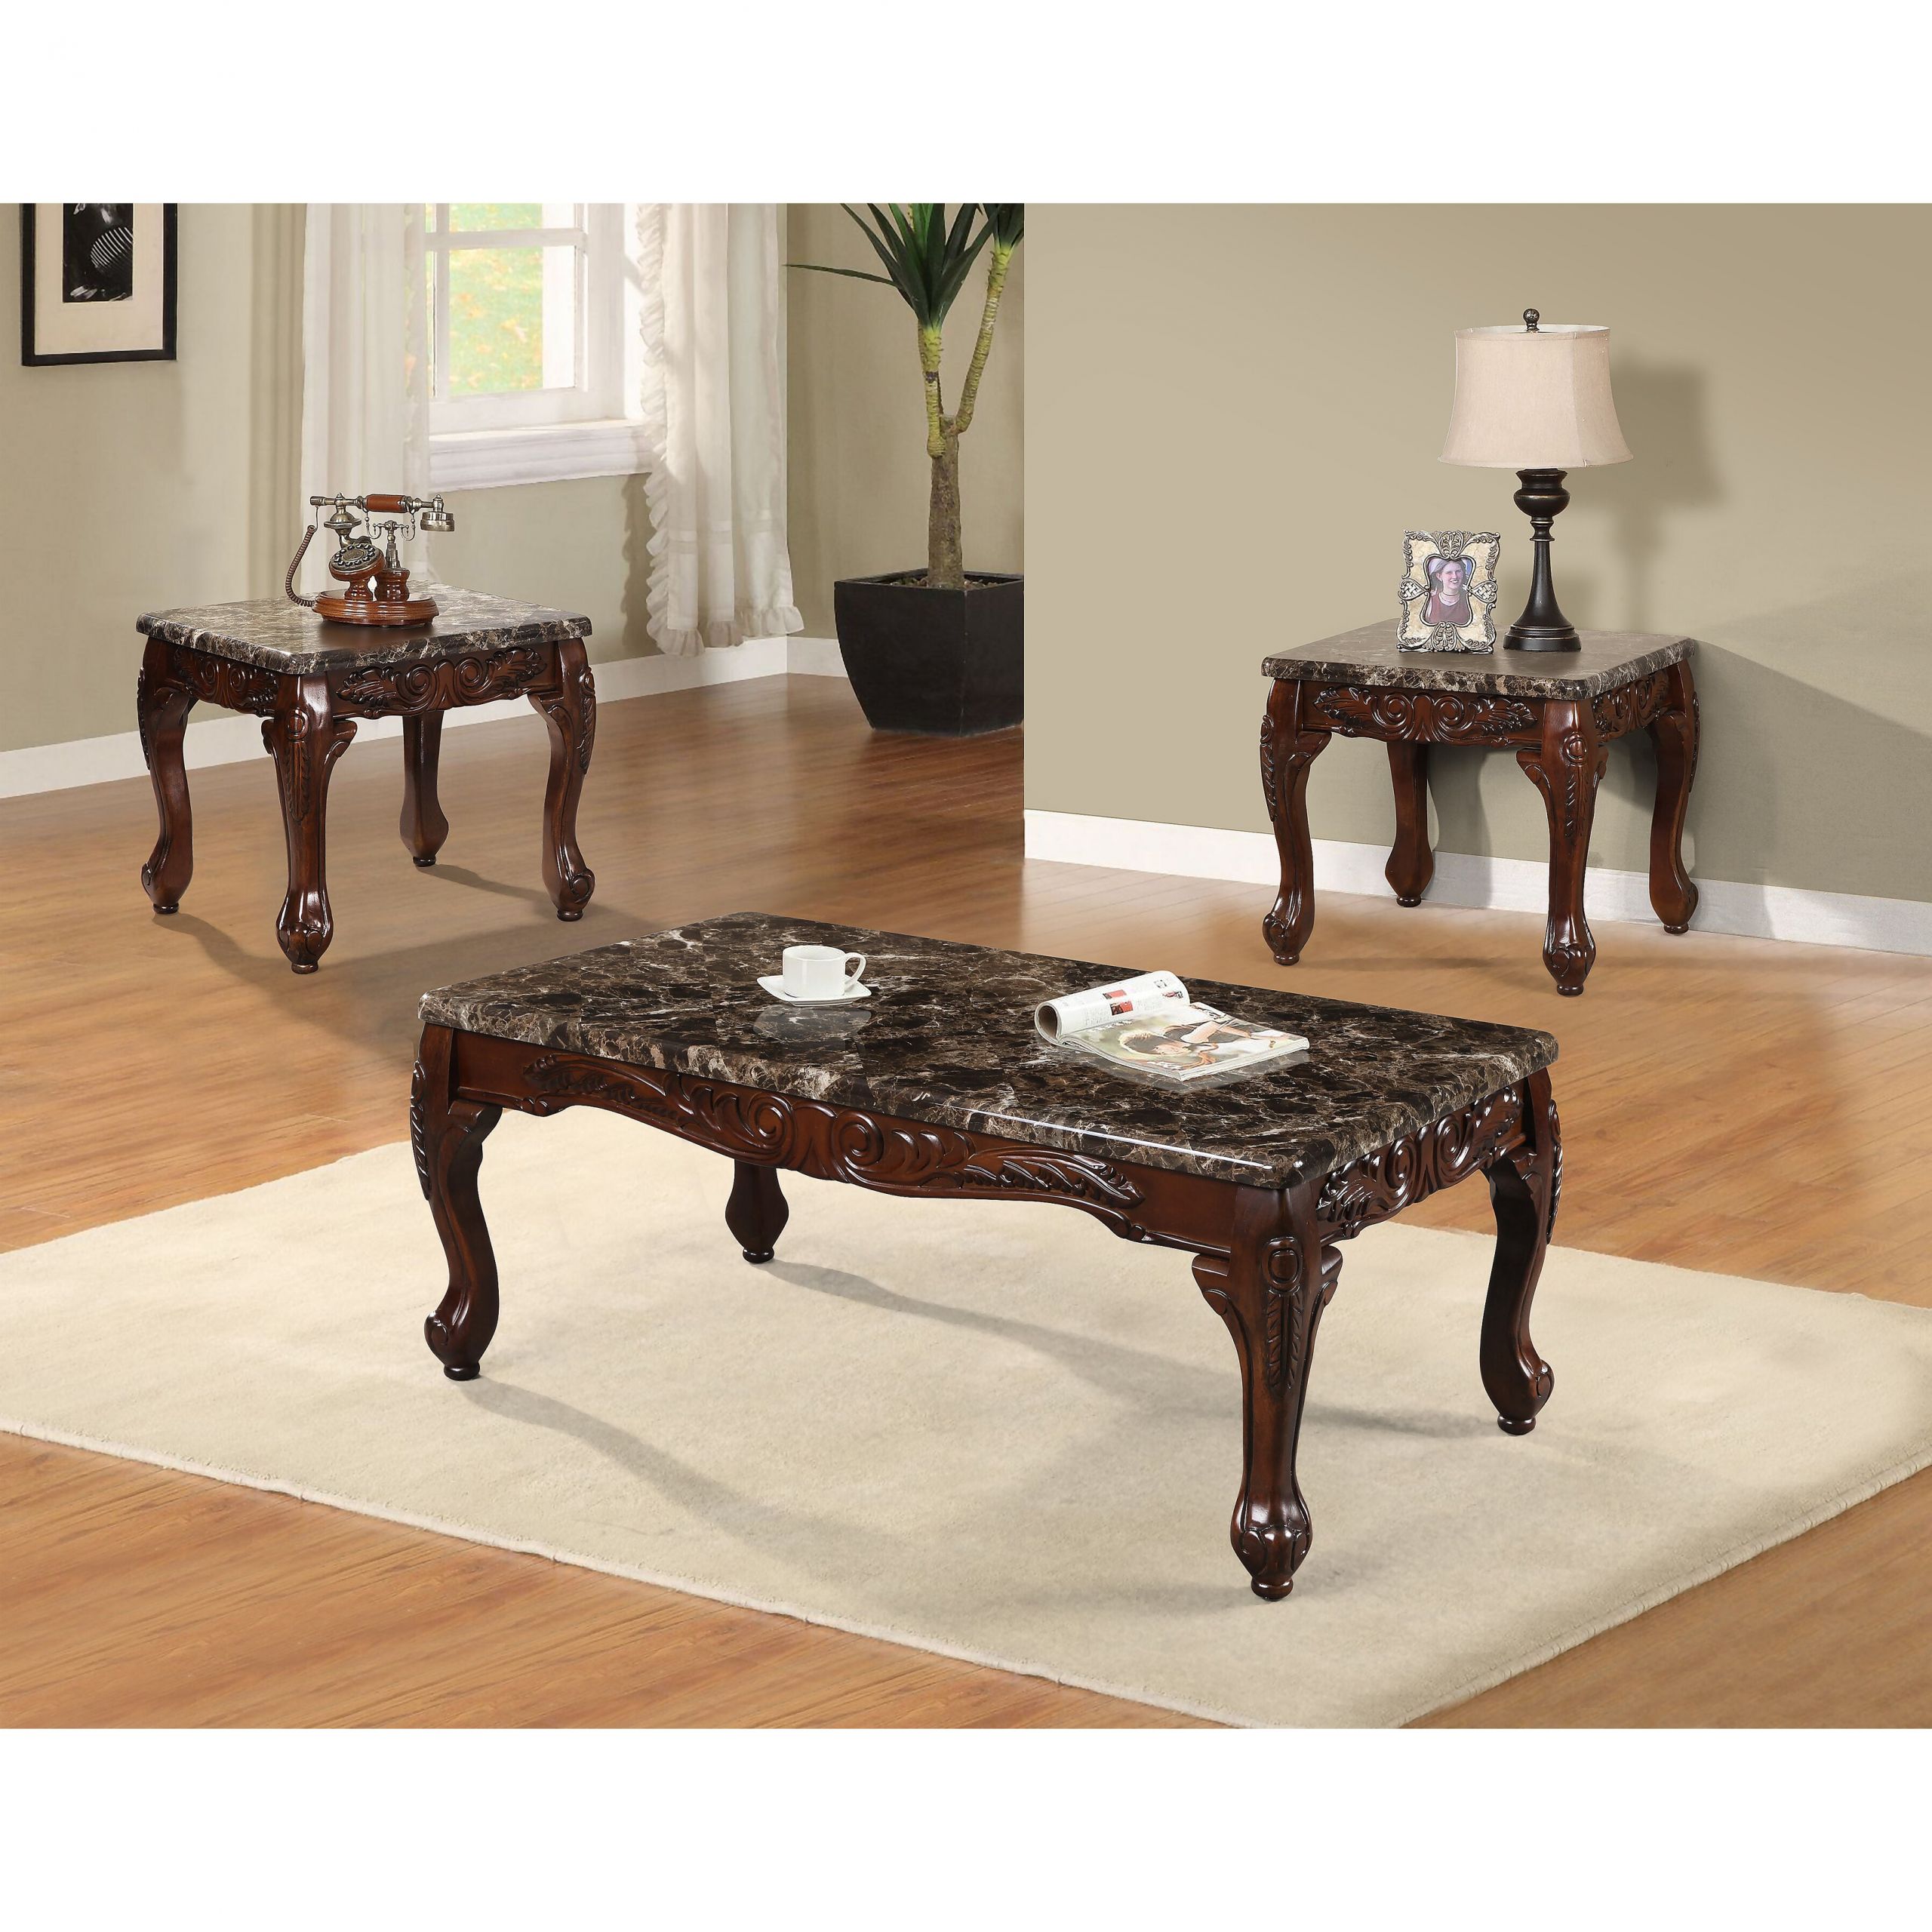 Living Room Coffee Table Sets
 Best Quality Furniture 3 Piece Coffee Table Set & Reviews